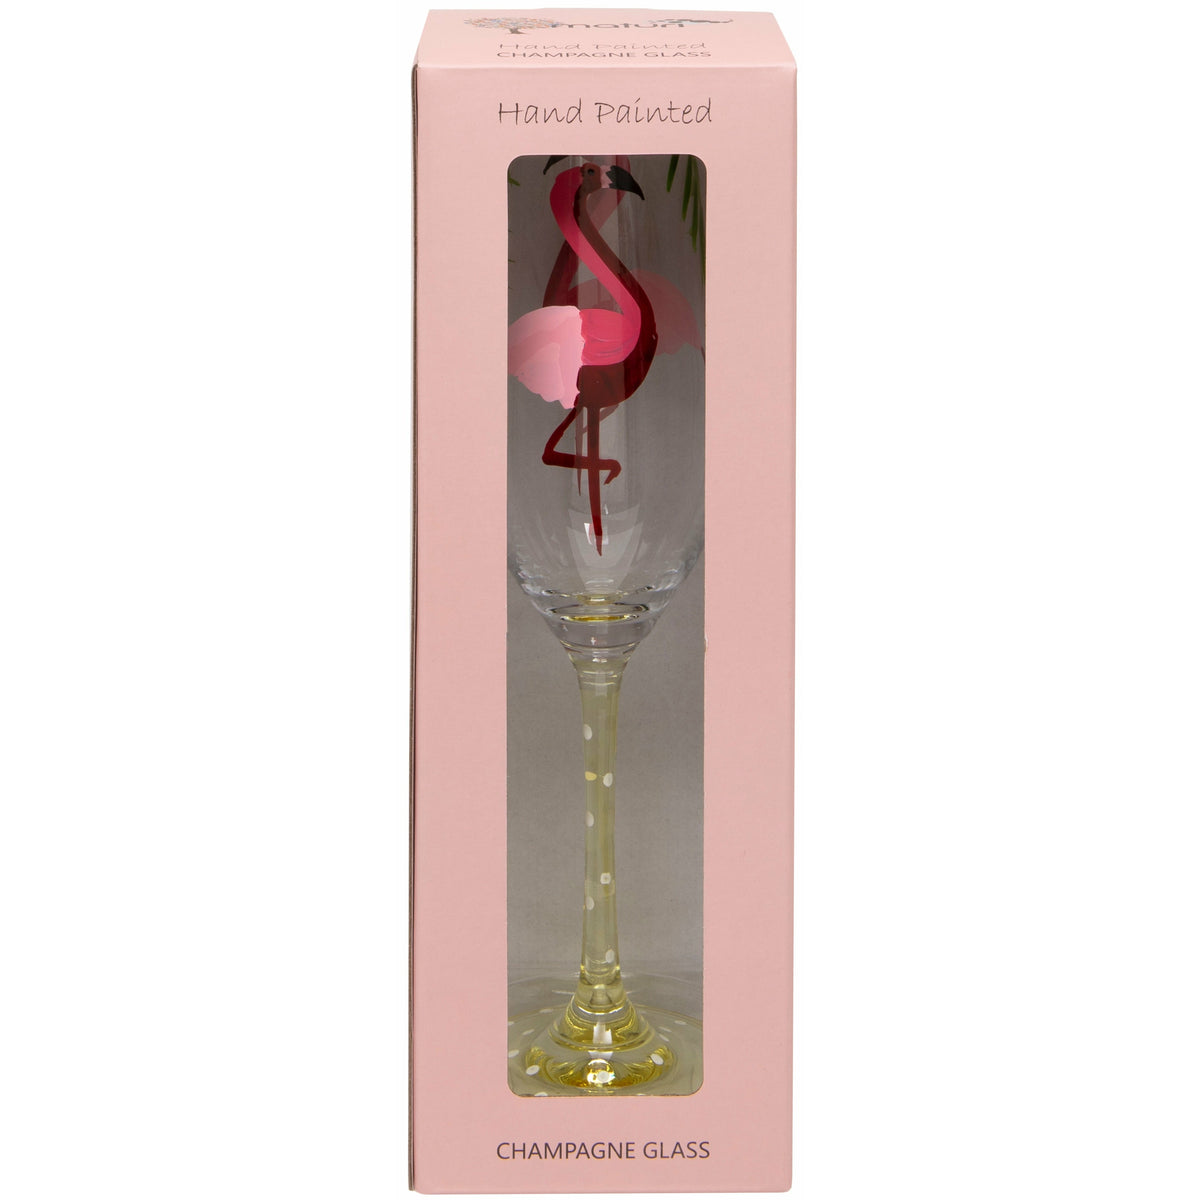 Hand Painted Flamingo Champagne Flute in Box